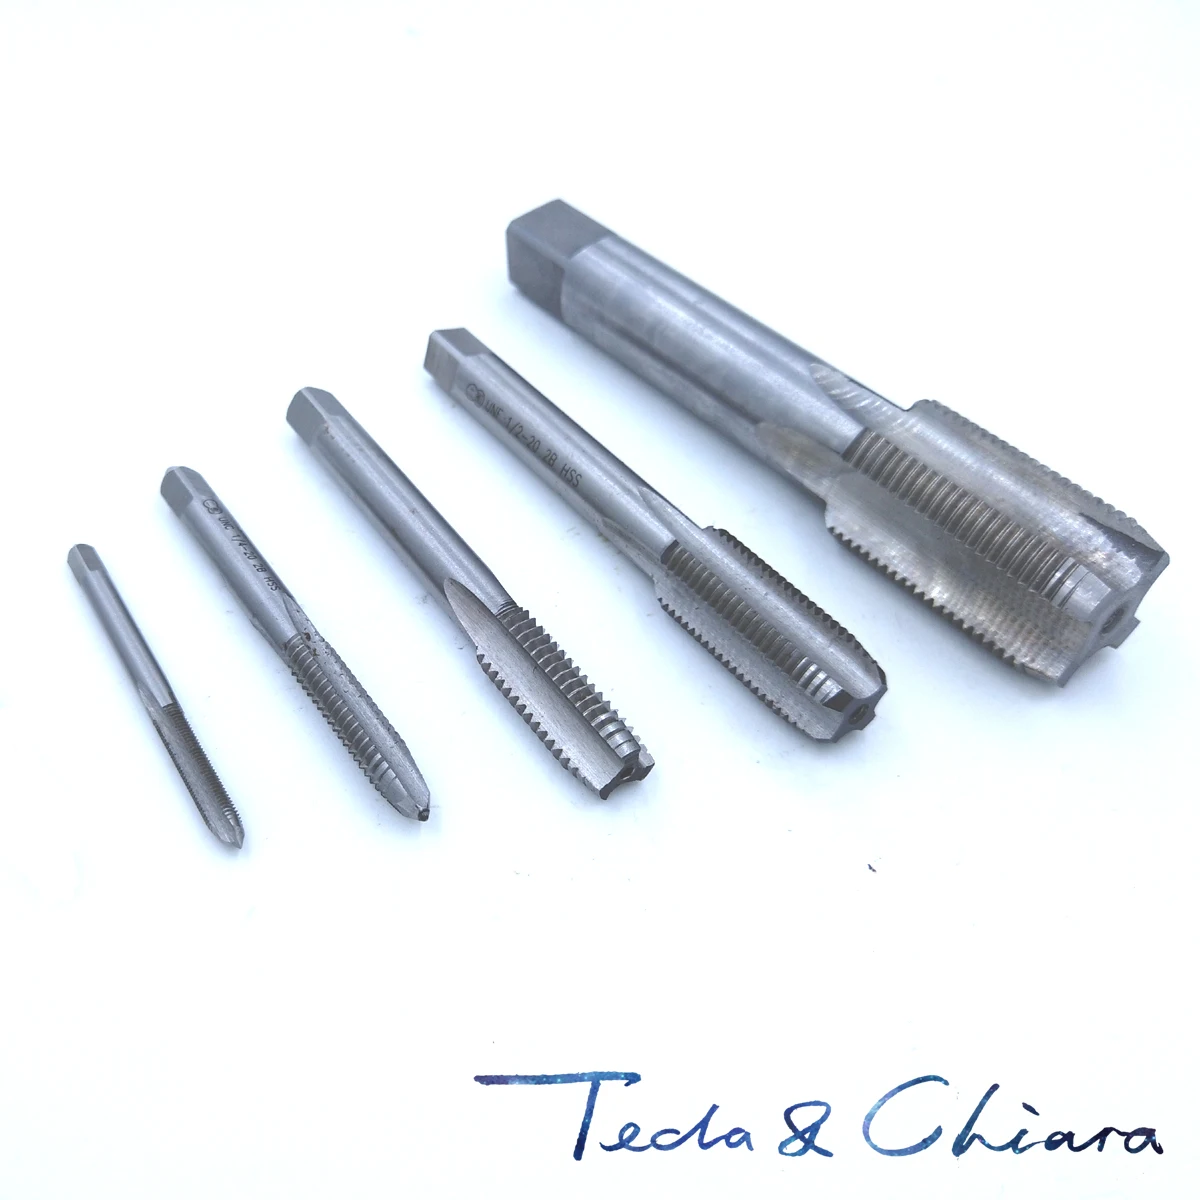 

M20 M22 M24 x 1mm 1.5mm 2mm 2.5mm 3mm Left Hand Metric Tap Pitch Threading Tools For Mold Machining * 1 1.5 2 2.5 3